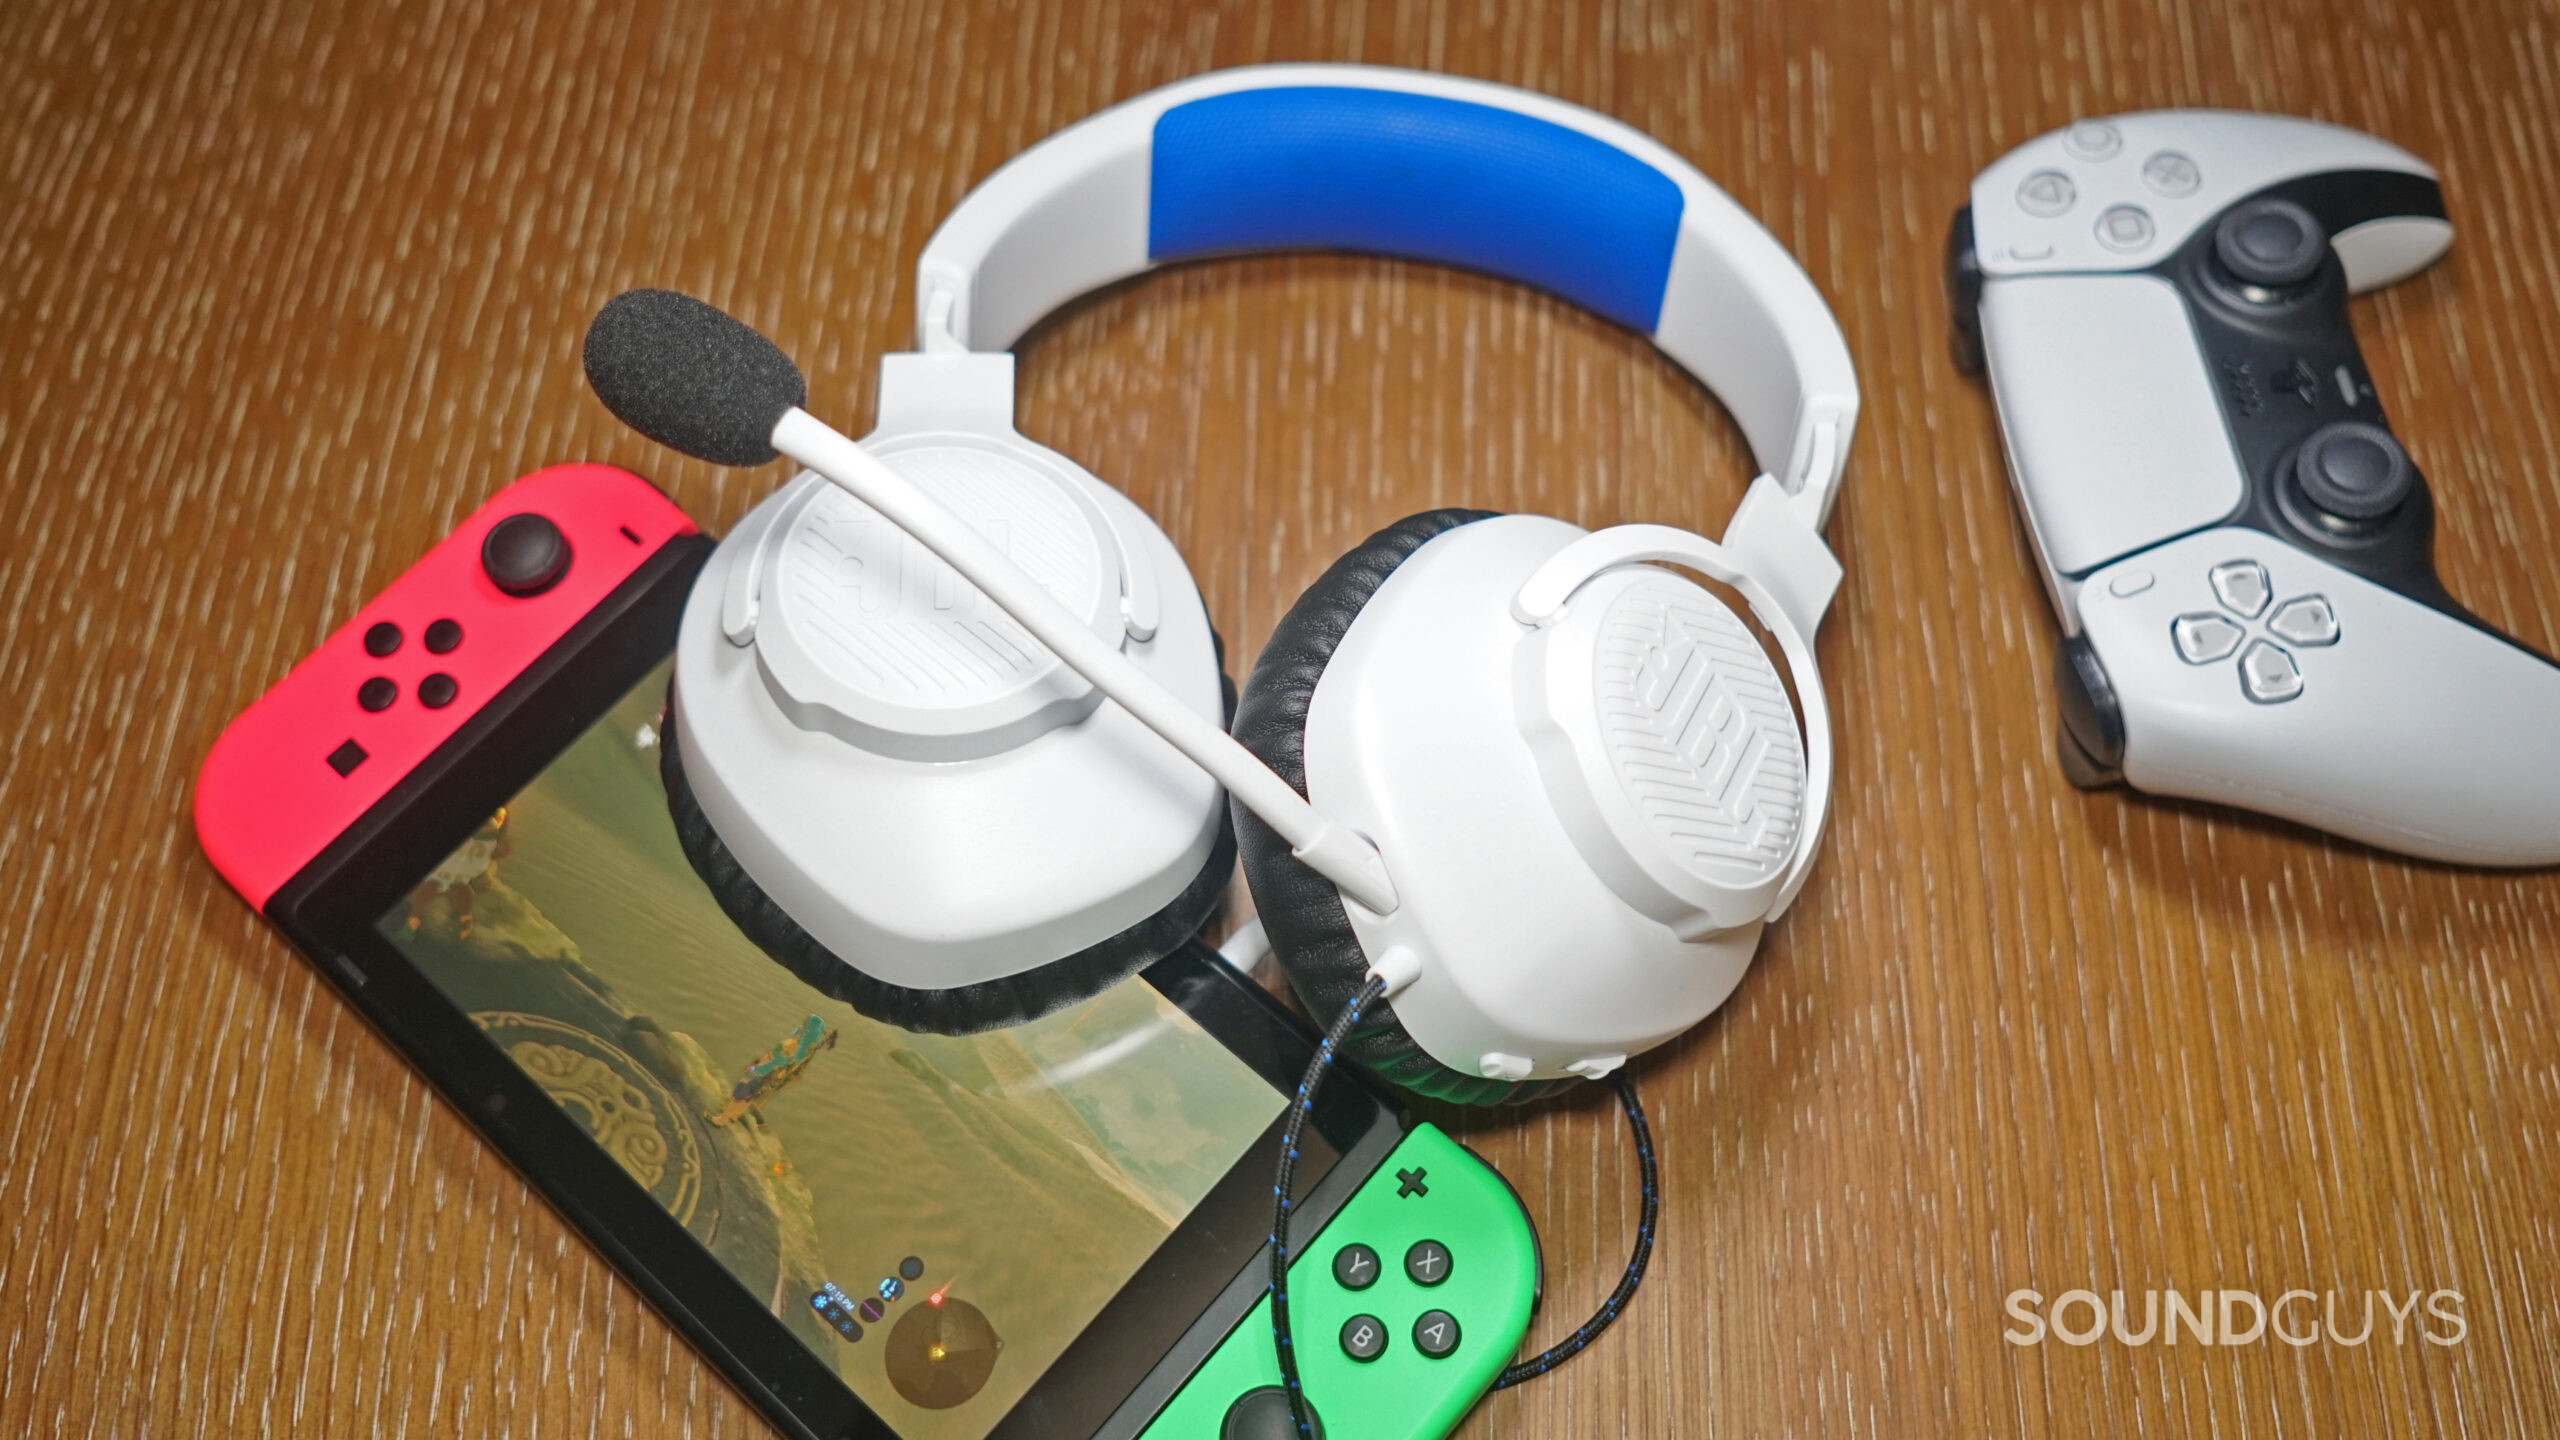 The JBL Quantum 100P lays on a Nintendo Switch running Legend of Zelda Breath of the Wild, next a PlayStation dualsense controller.